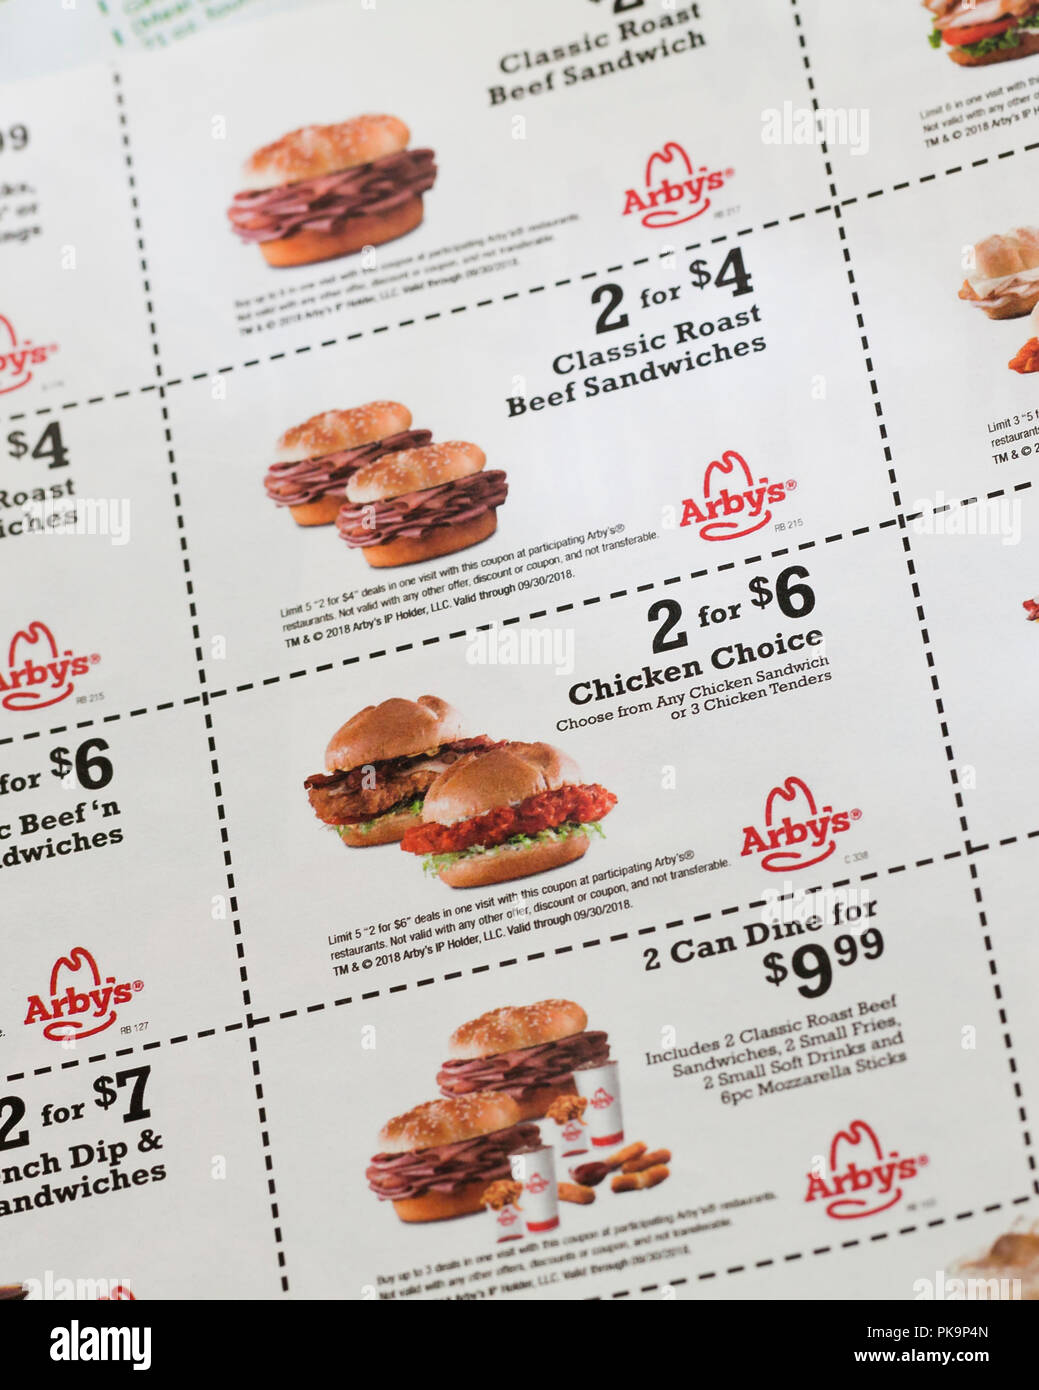 Arby's Sandwich Coupons (Fast food Coupon) - USA Stockfoto